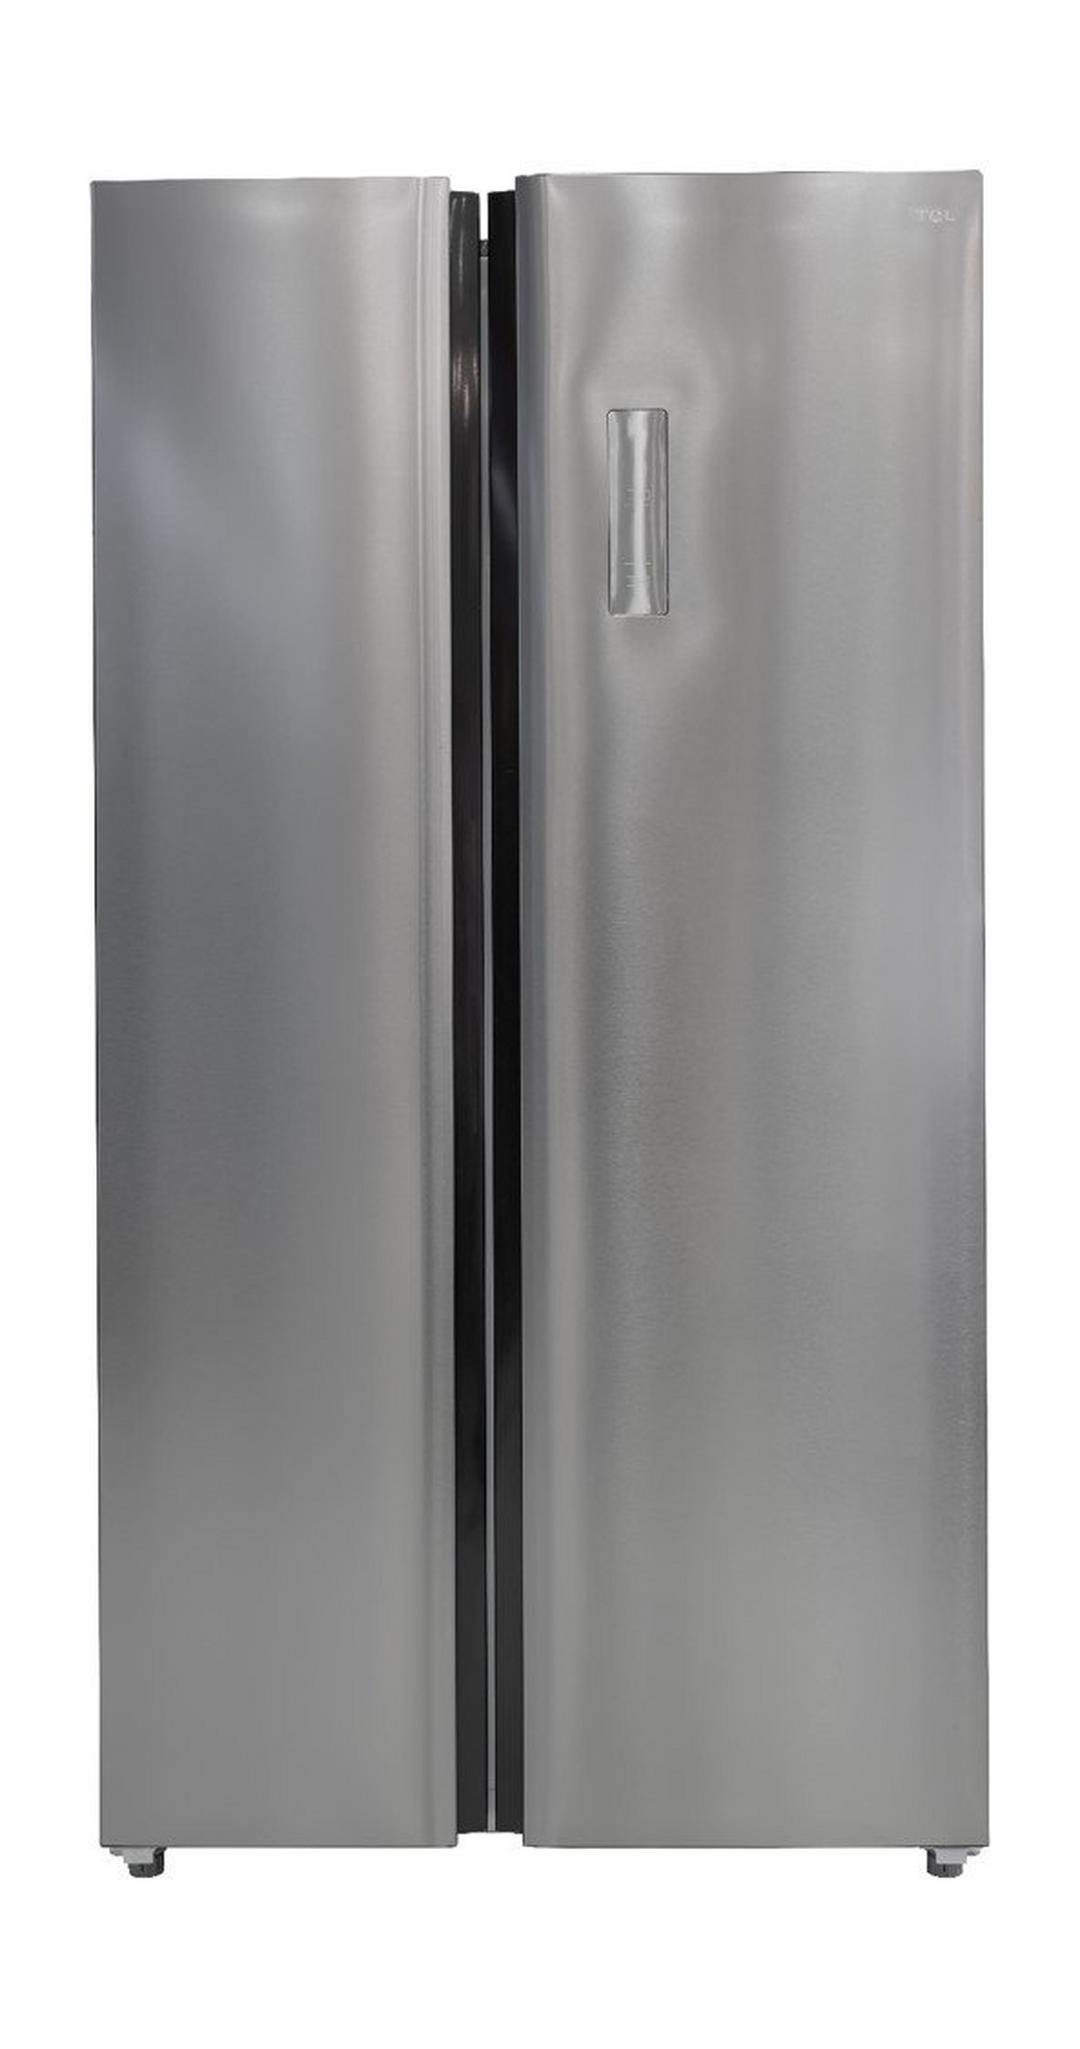 TCL Side By Side Refrigerator and Freezer, 17CFT, 488-Liters, TRF-520WEX - Stainless Steel